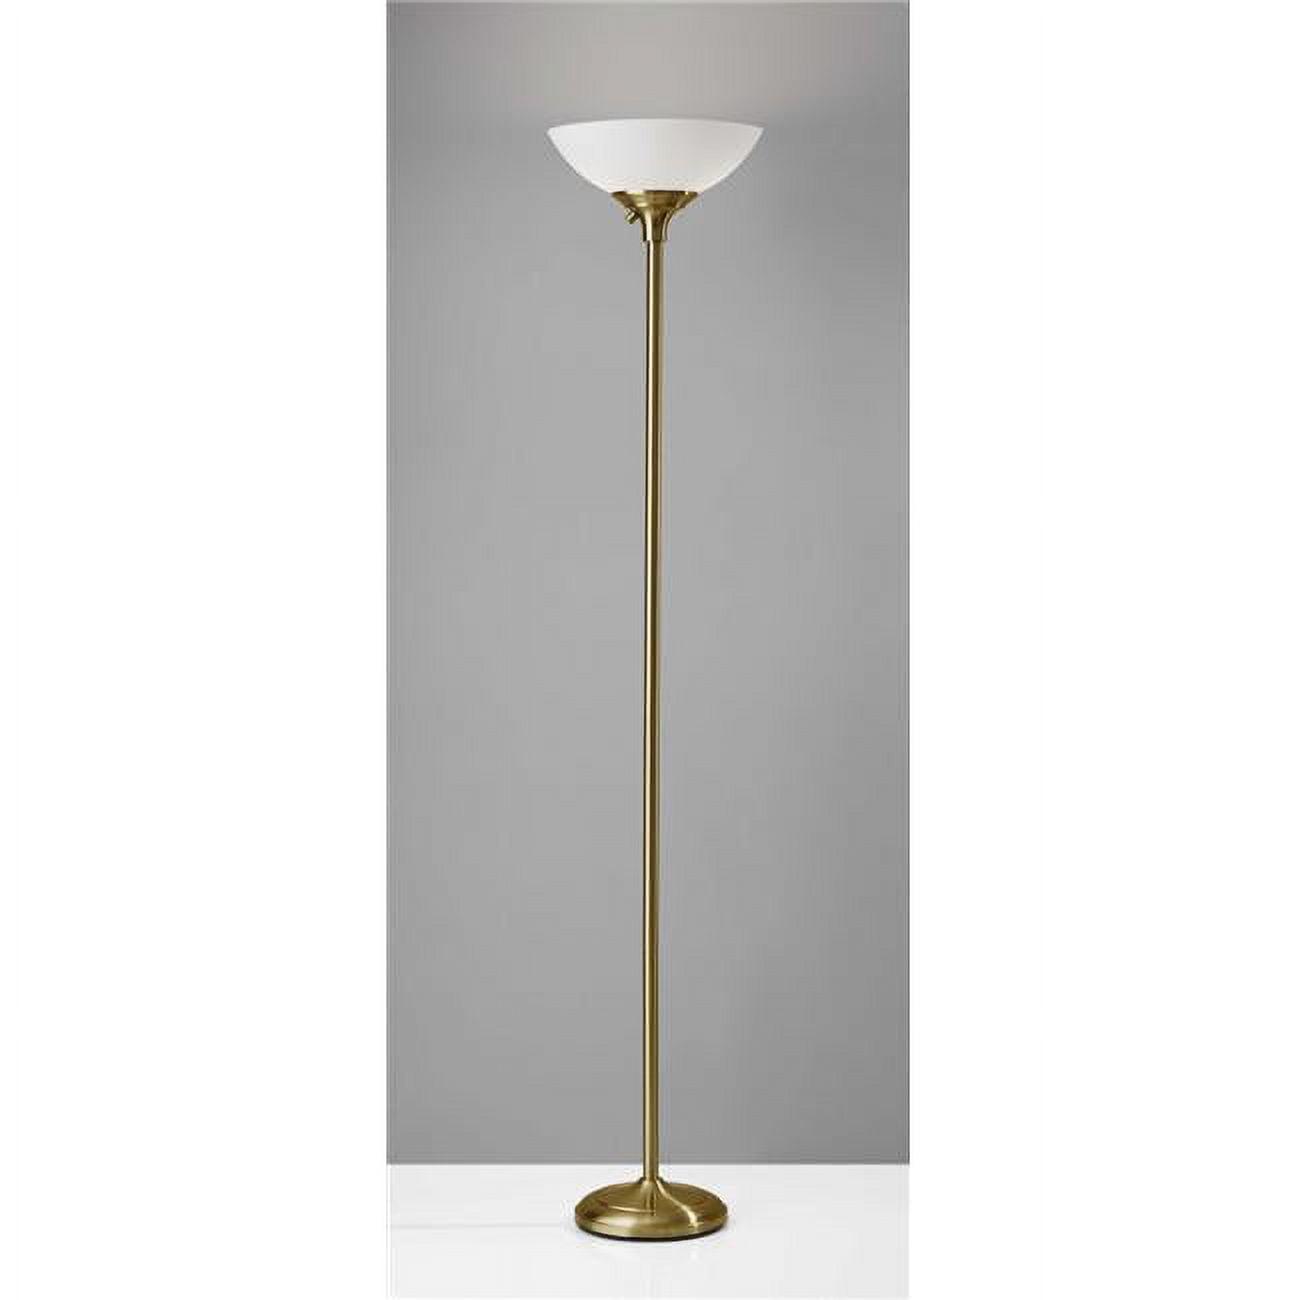 Elegant Brass Metal Torchiere Floor Lamp with 3-Way Switch and Bright Illumination